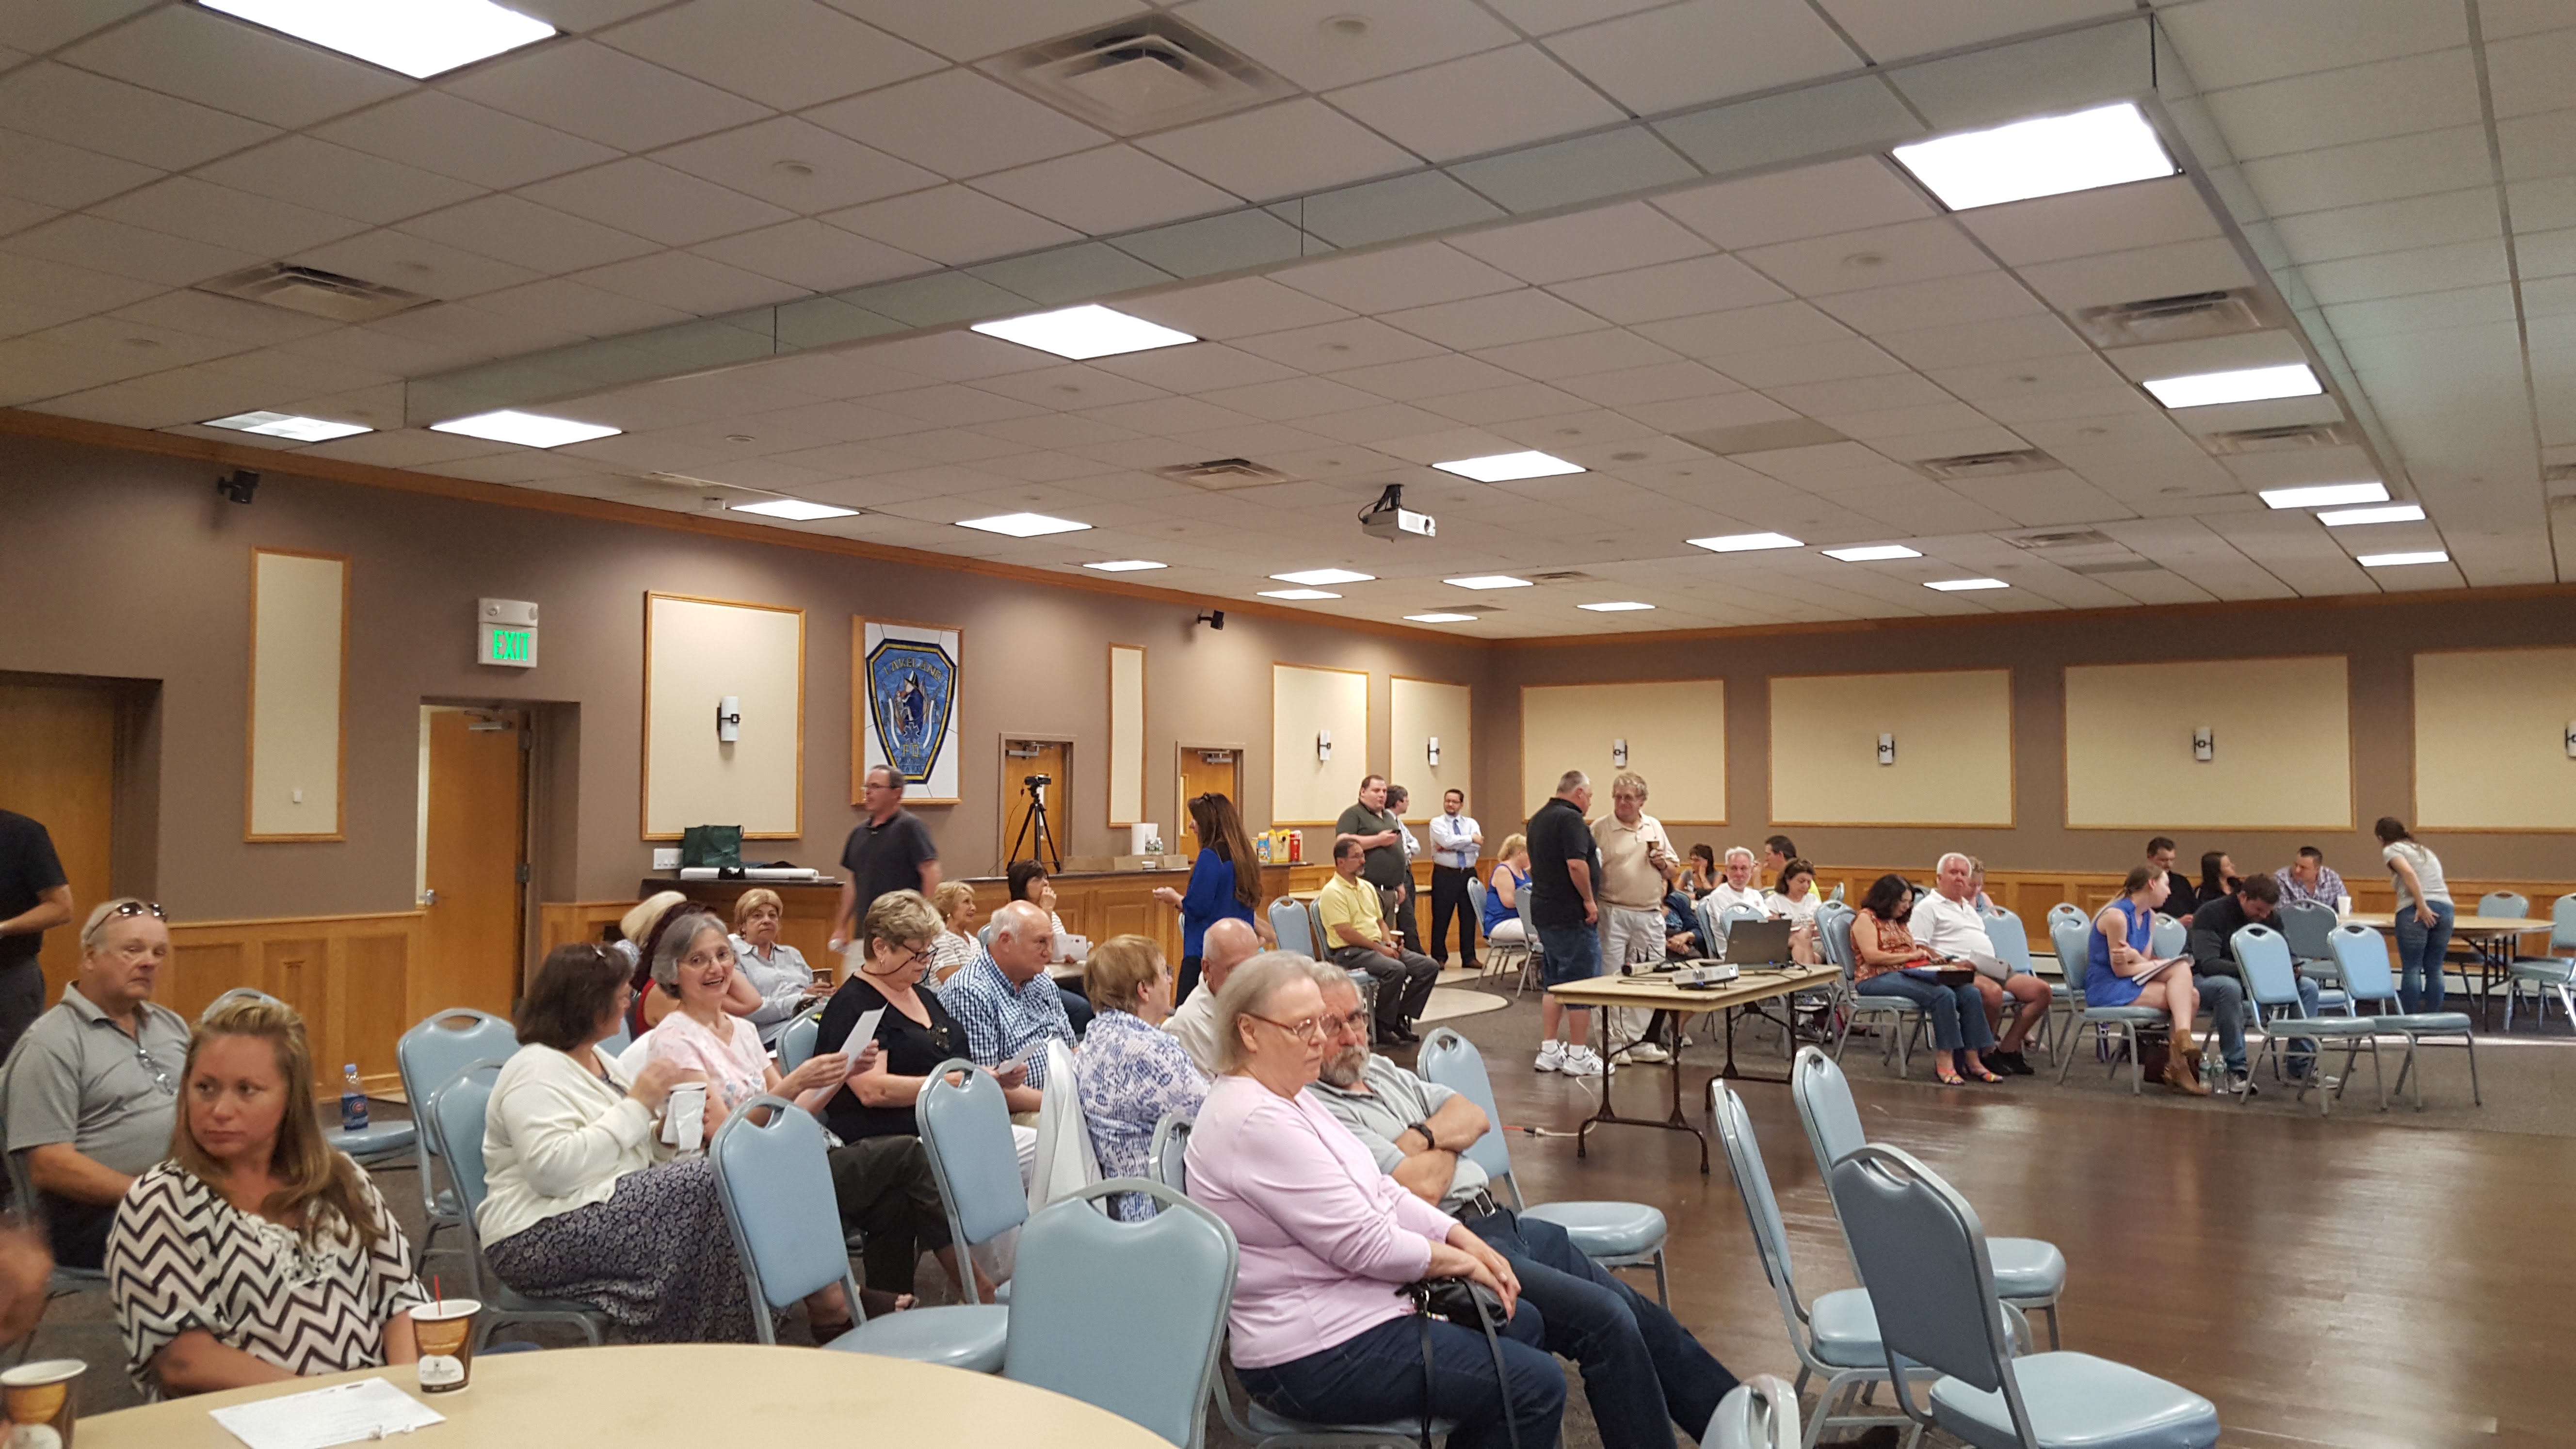 On June 28, 2017, the Ronkonkoma Civic Association hosted their event 'Shaping Your Community' as part of the ongoing community visioning process 